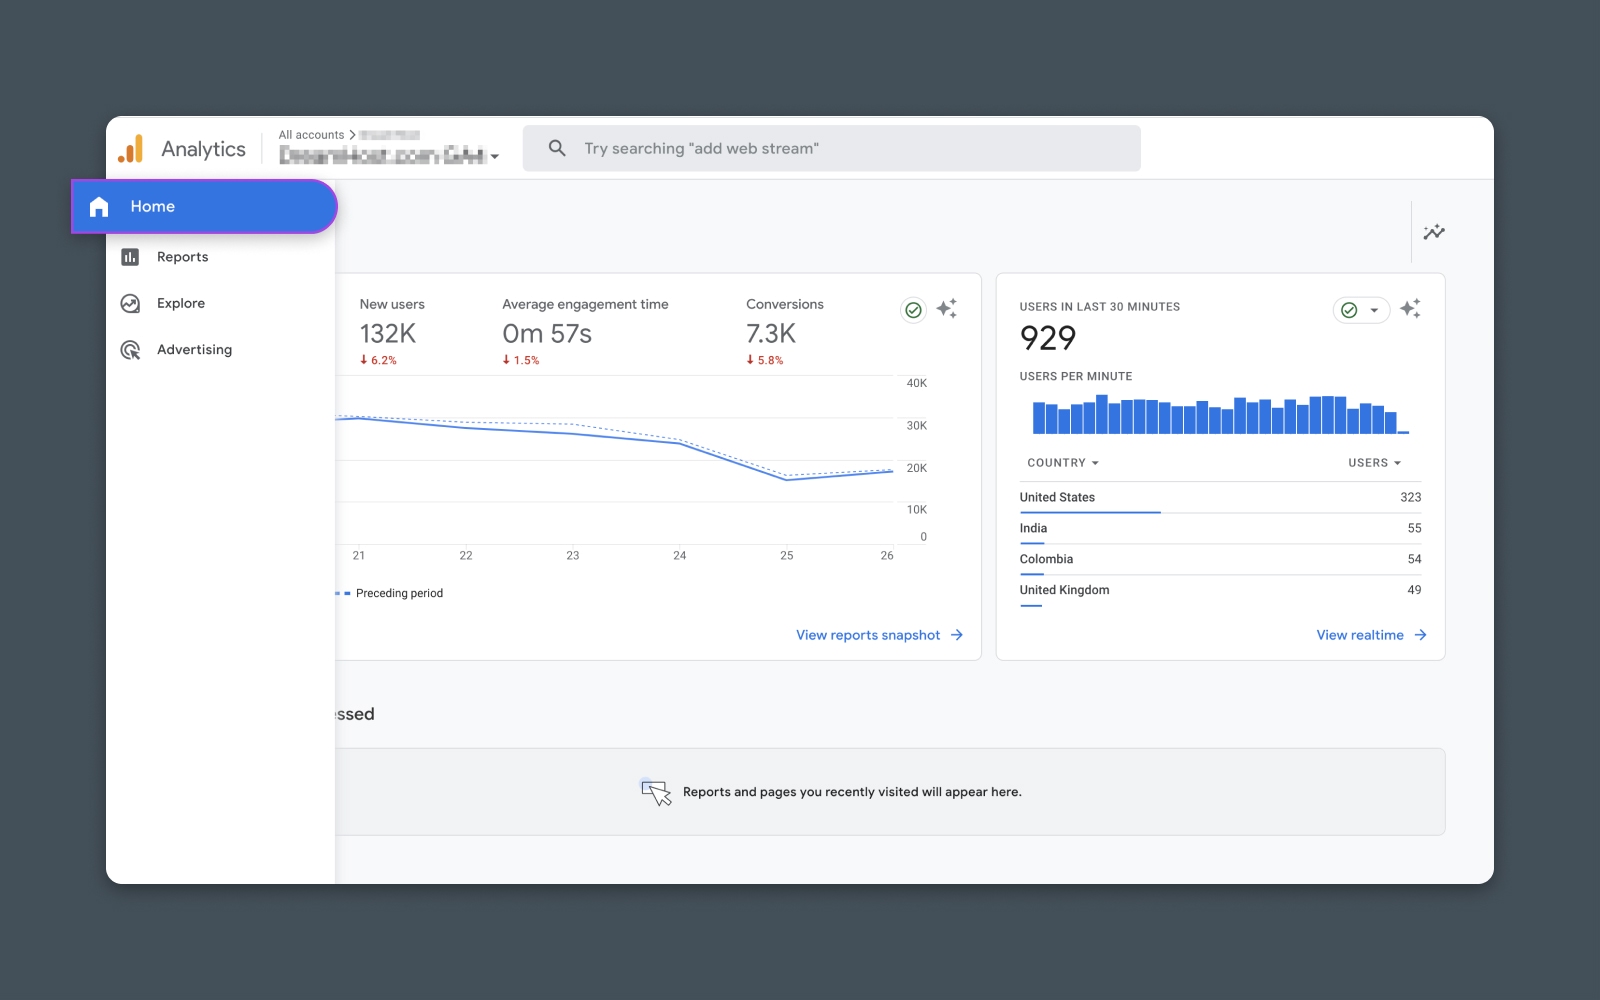 To use Analytics Intelligence, you can sign into Google Analytics and choose the website property you want to explore. Navigate to the Home page using the left sidebar.